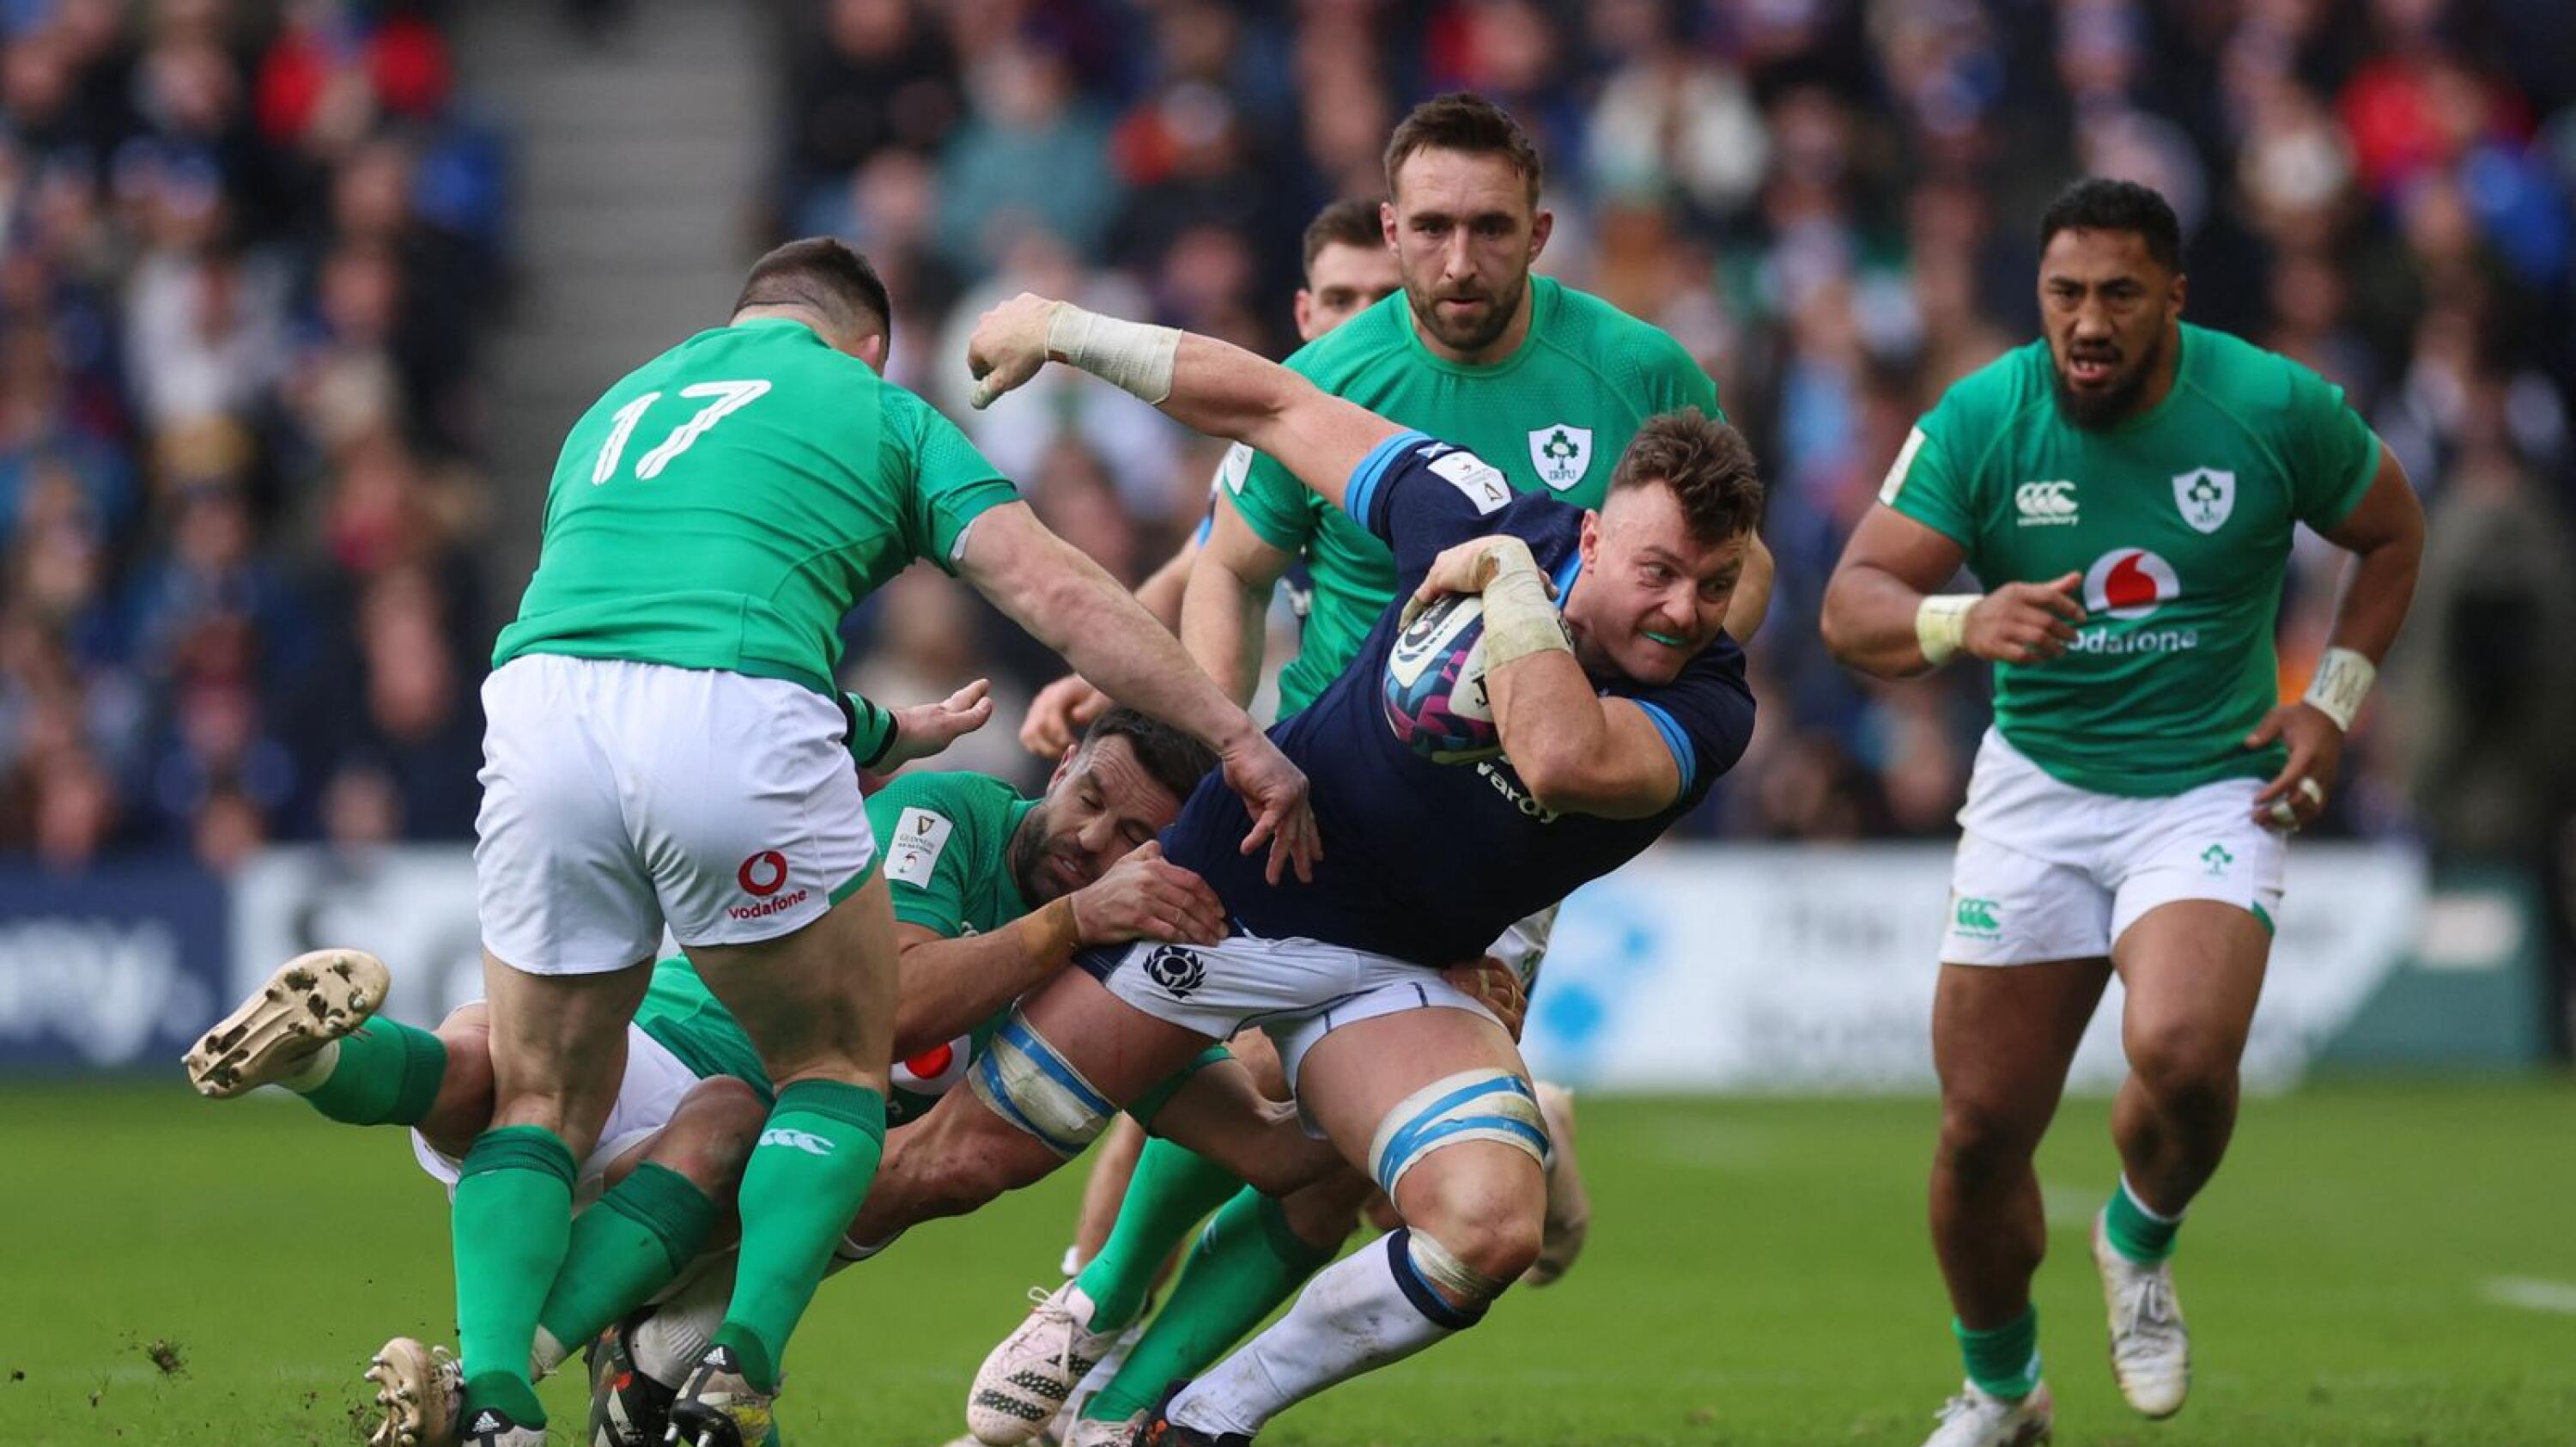 Scotland's Jack Dempsey in action during their Six Nations match against Ireland at Murrayfield in Edinburgh